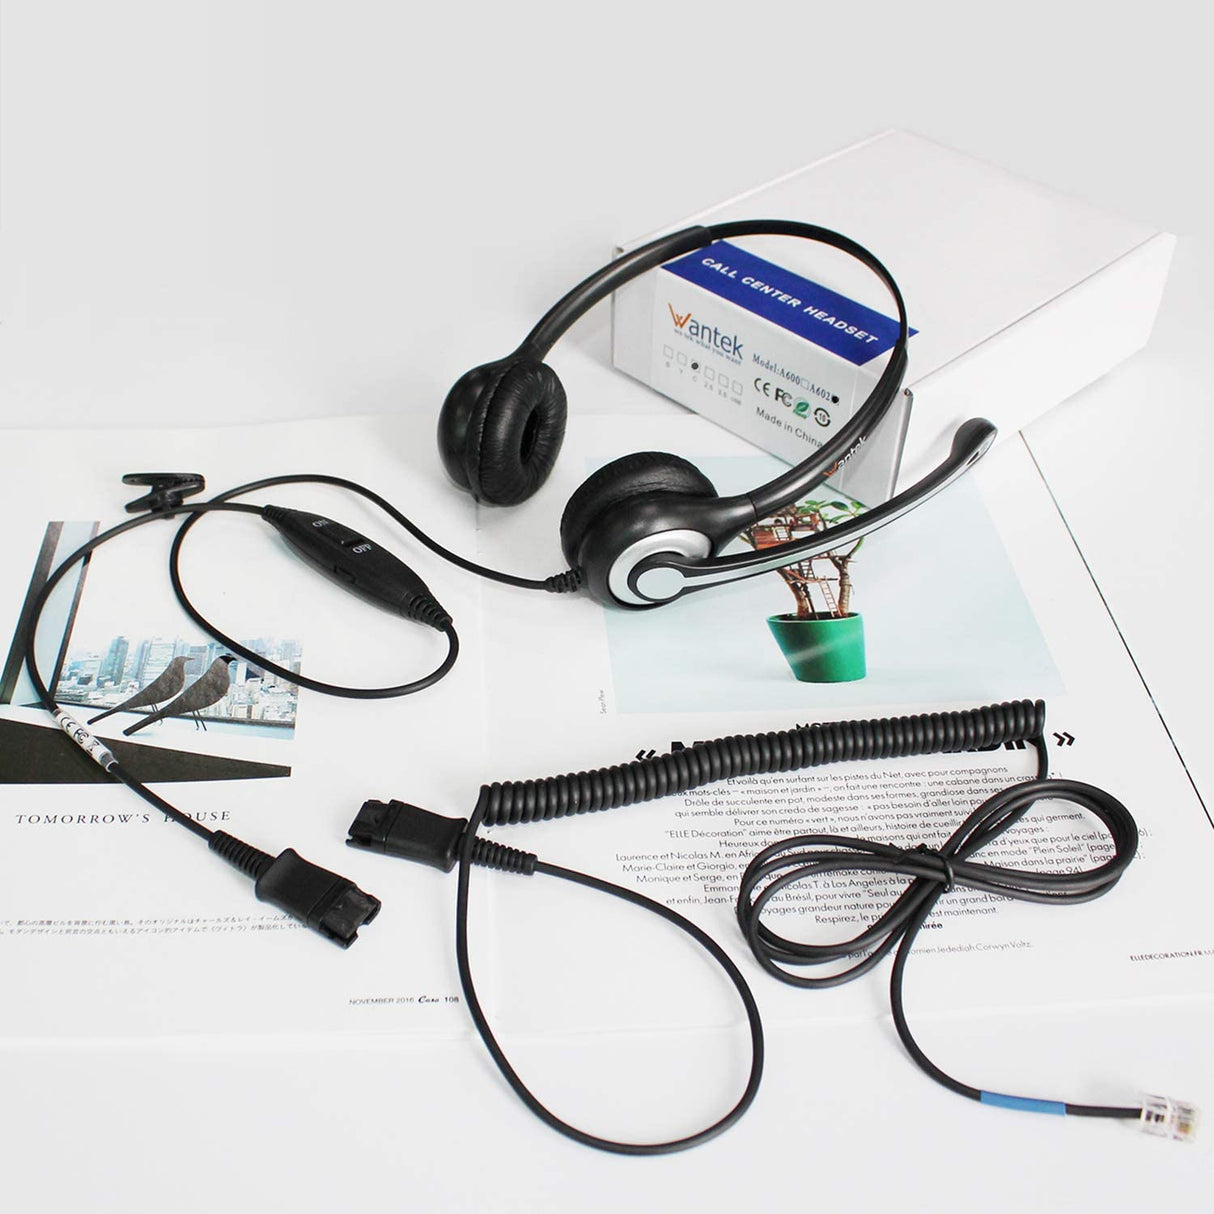 Wantek® h602 RJ9【RJ2】 wired headset with QD for call center - iwantekWantek® h602 RJ9【RJ2】 wired headset with QD for call center